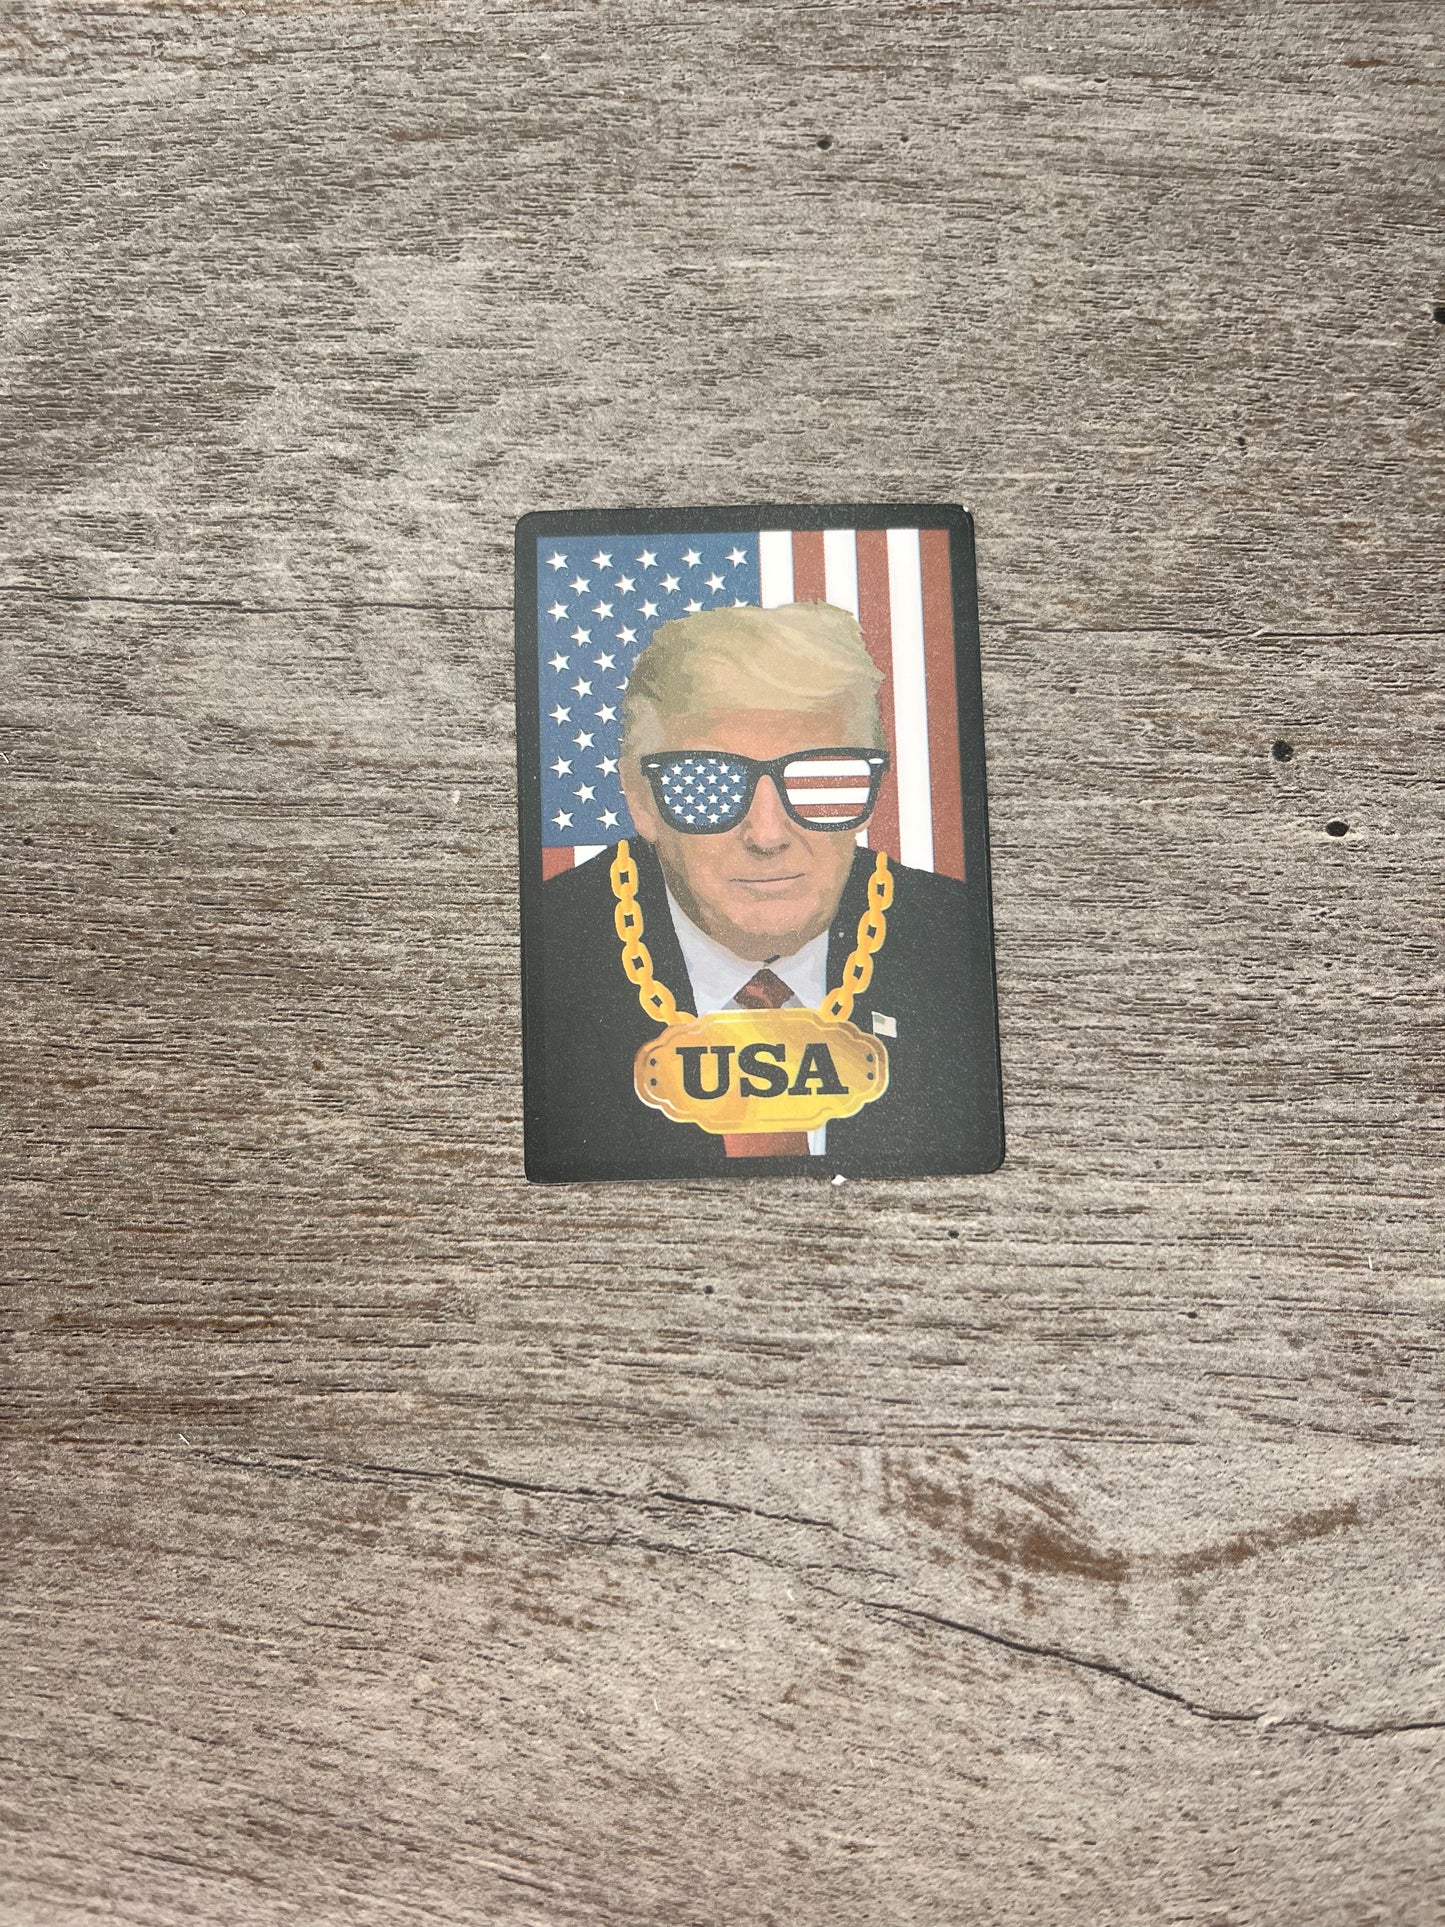 Trump Stickers {Multiple Styles Available}